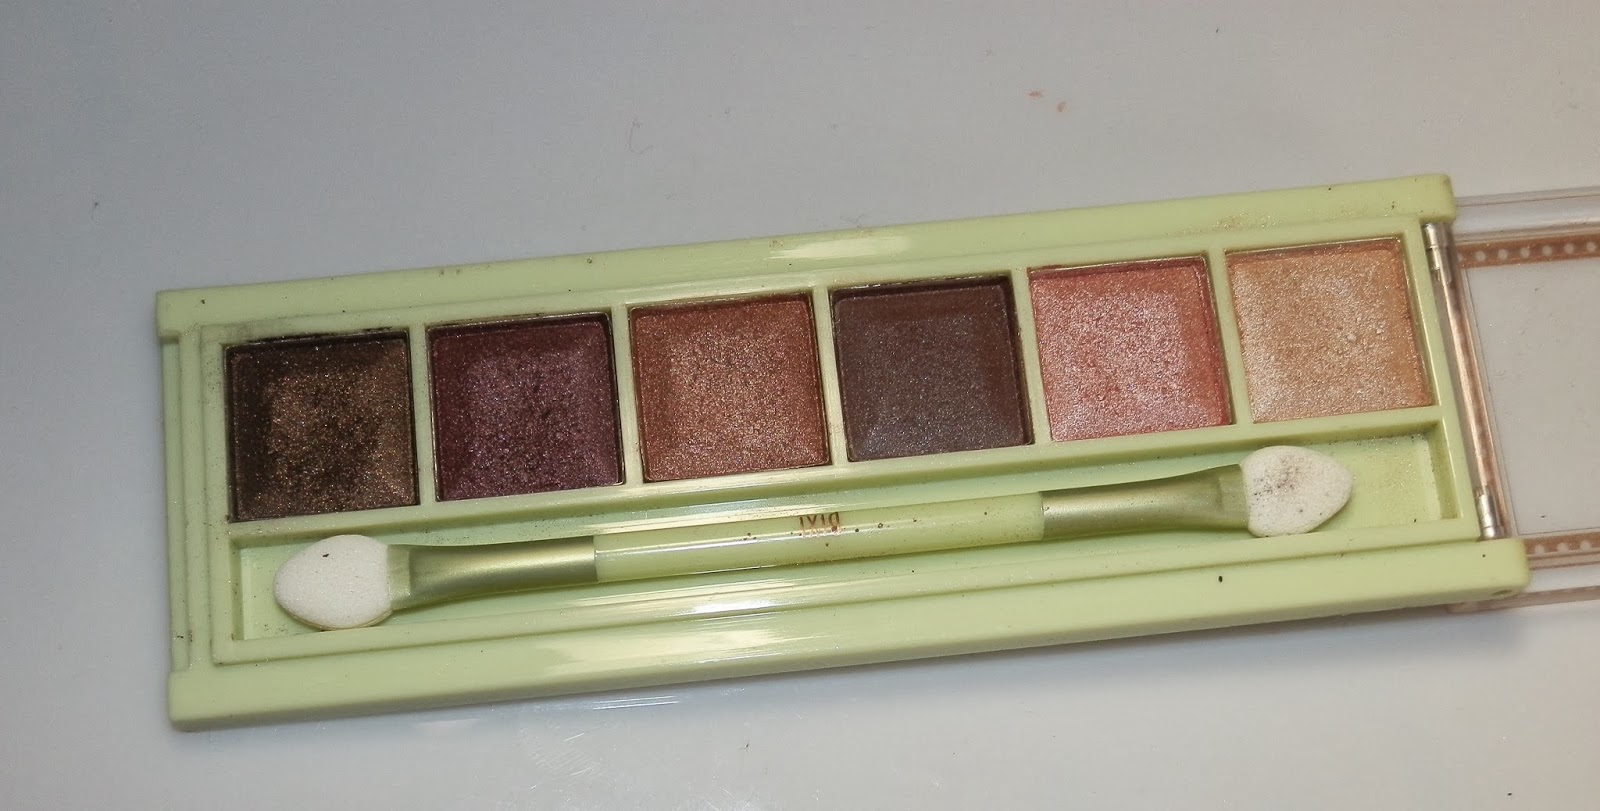 Pixi Beauty Icy Eye Palette Buff Blizzard Swatches